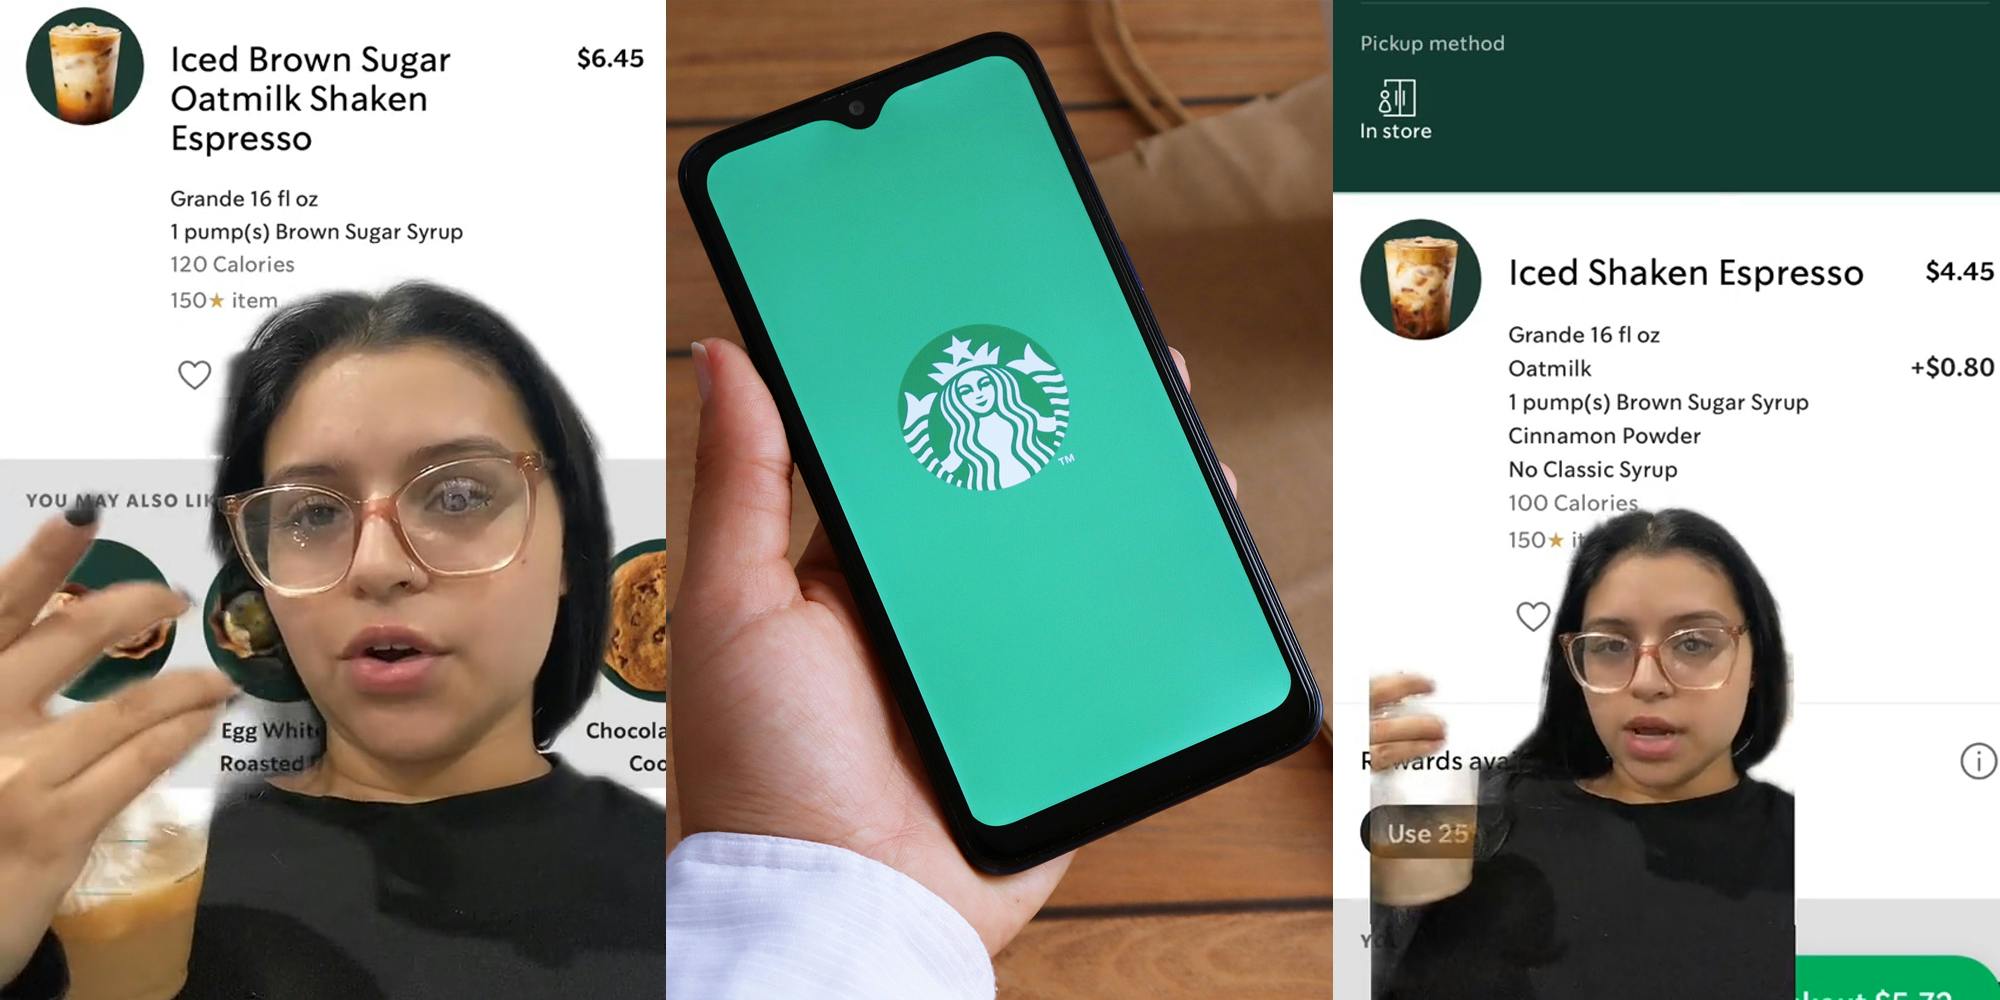 Woman greenscreen TikTok over Starbucks ordering on app "Iced Brown Sugar Oatmilk Shaken Espresso" for $6.45 (l) hand holding phone with Starbucks app on screen in front of wooden background (c) woman greenscreen TikTok over Starbucks ordering in app "Iced Shaken Espresso" for $4.45 (+$0.80) (r)